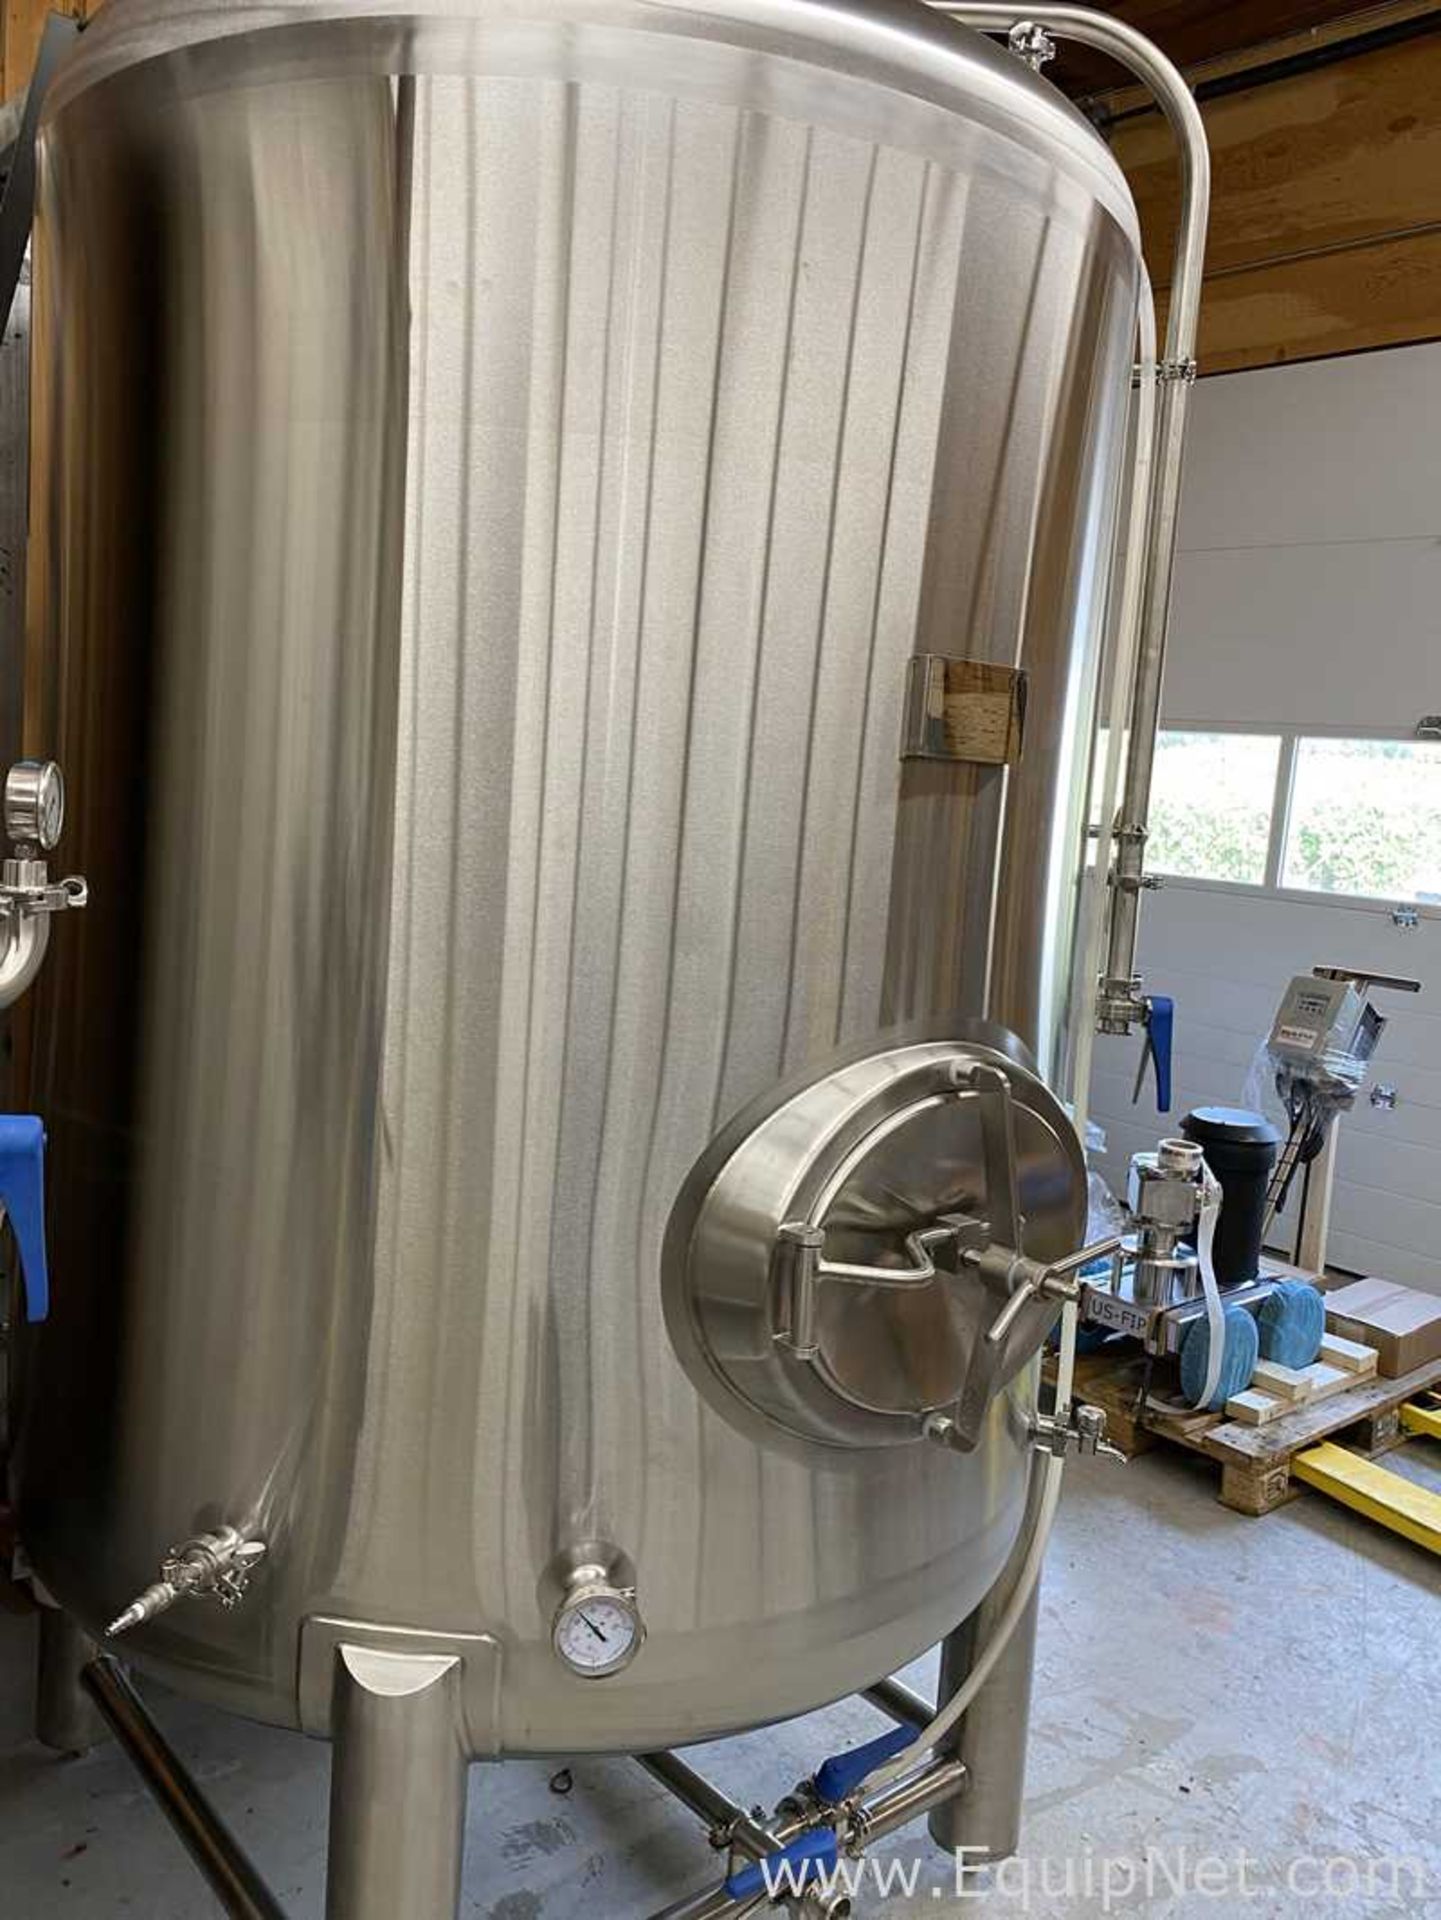 Prettech 20BBL BRITE Brewery Tanks 25 BBL Working Capacity 20BBL 620 Gallons - Image 3 of 6